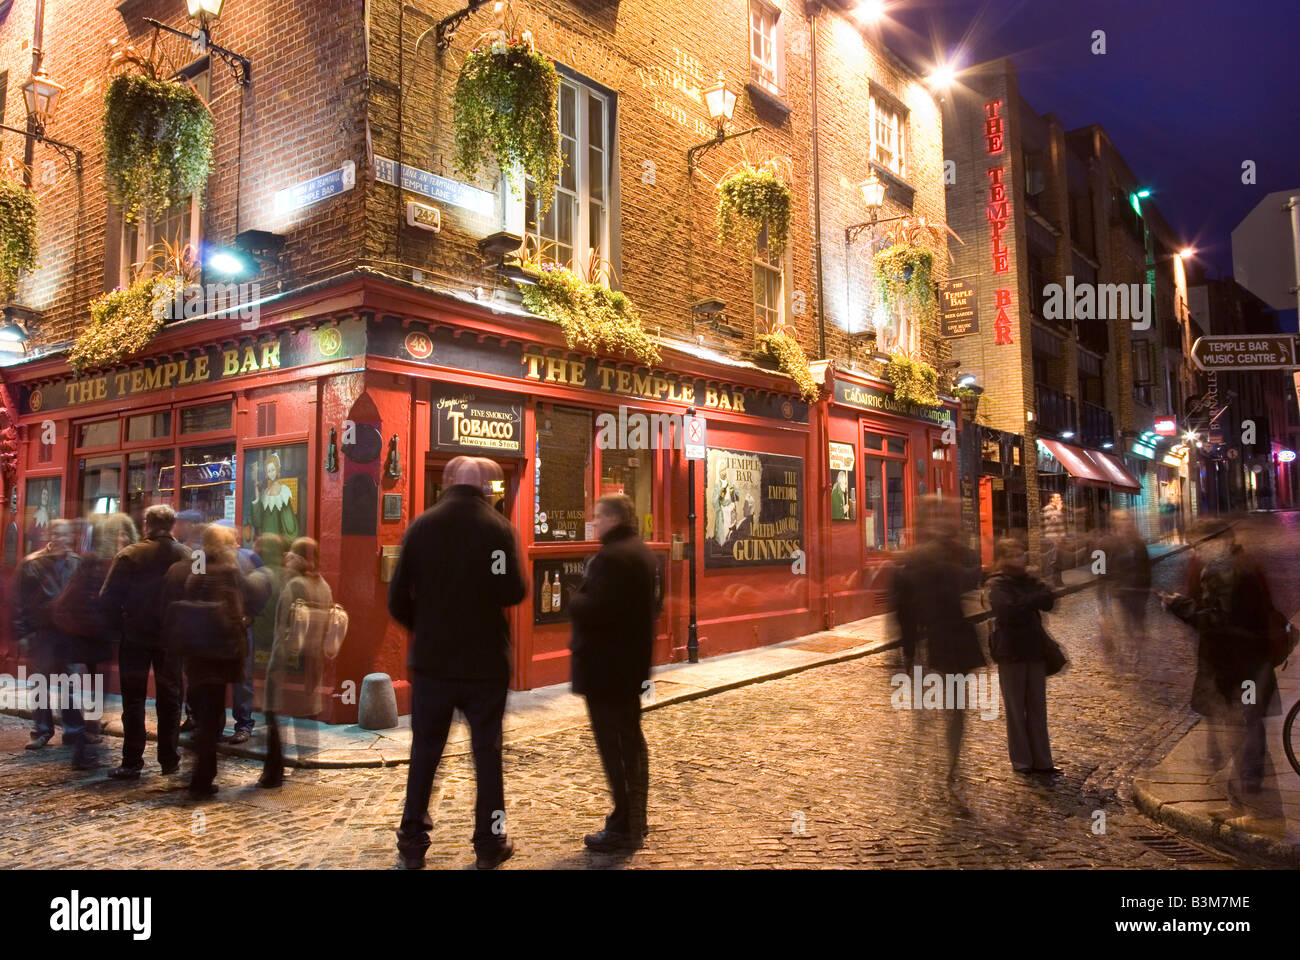 People outside the famous Temple Bar in Temple Bar, Dublin, Ireland at night Stock Photo